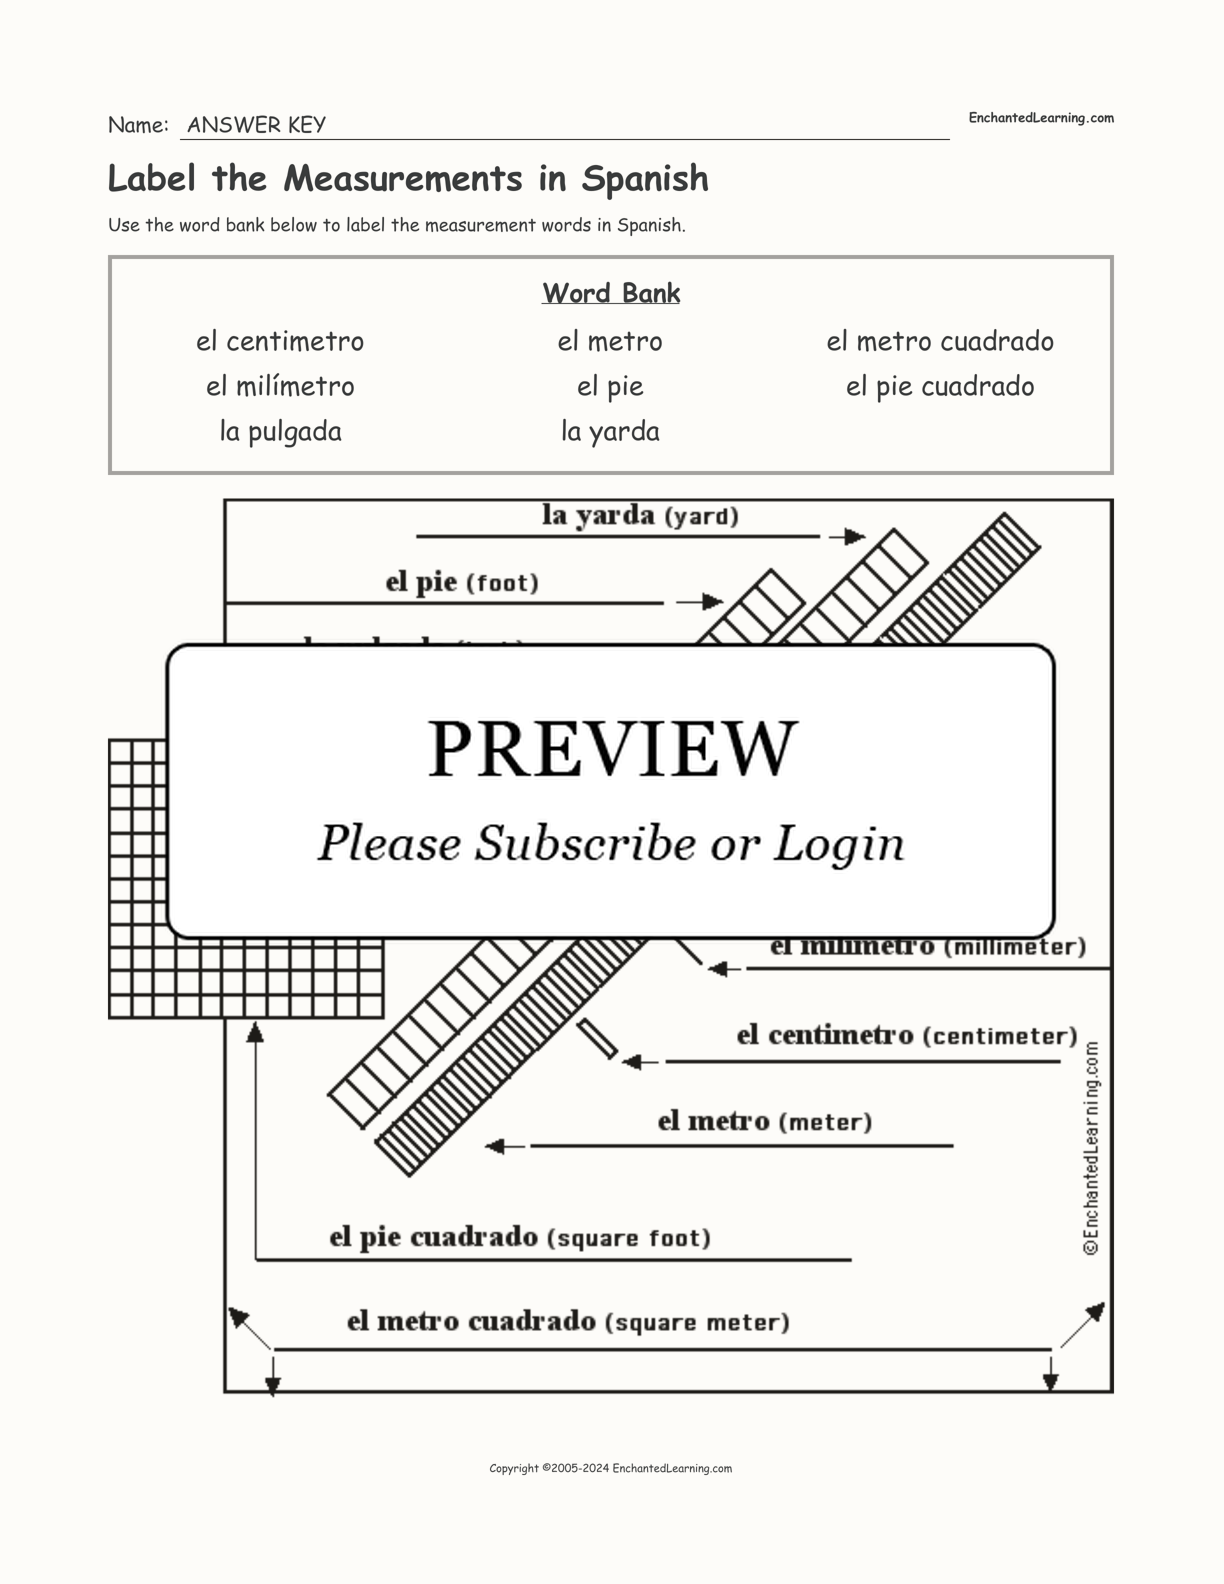 Label the Measurements in Spanish interactive worksheet page 2